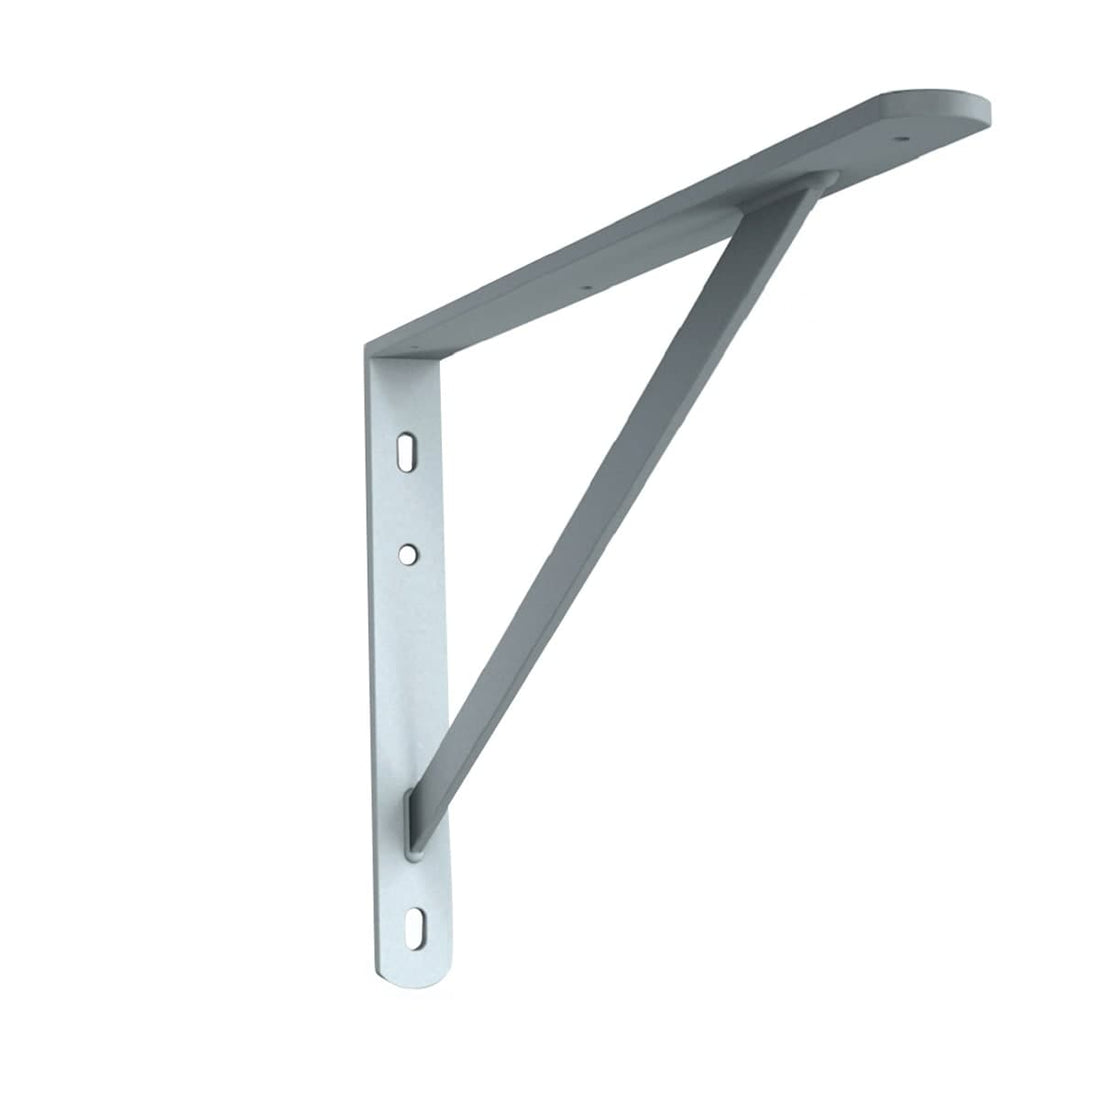 OBELIX SIDDLE RAIL SUPPORT D50xH31CM CARRYING 50KG IN GALVANIZED METAL